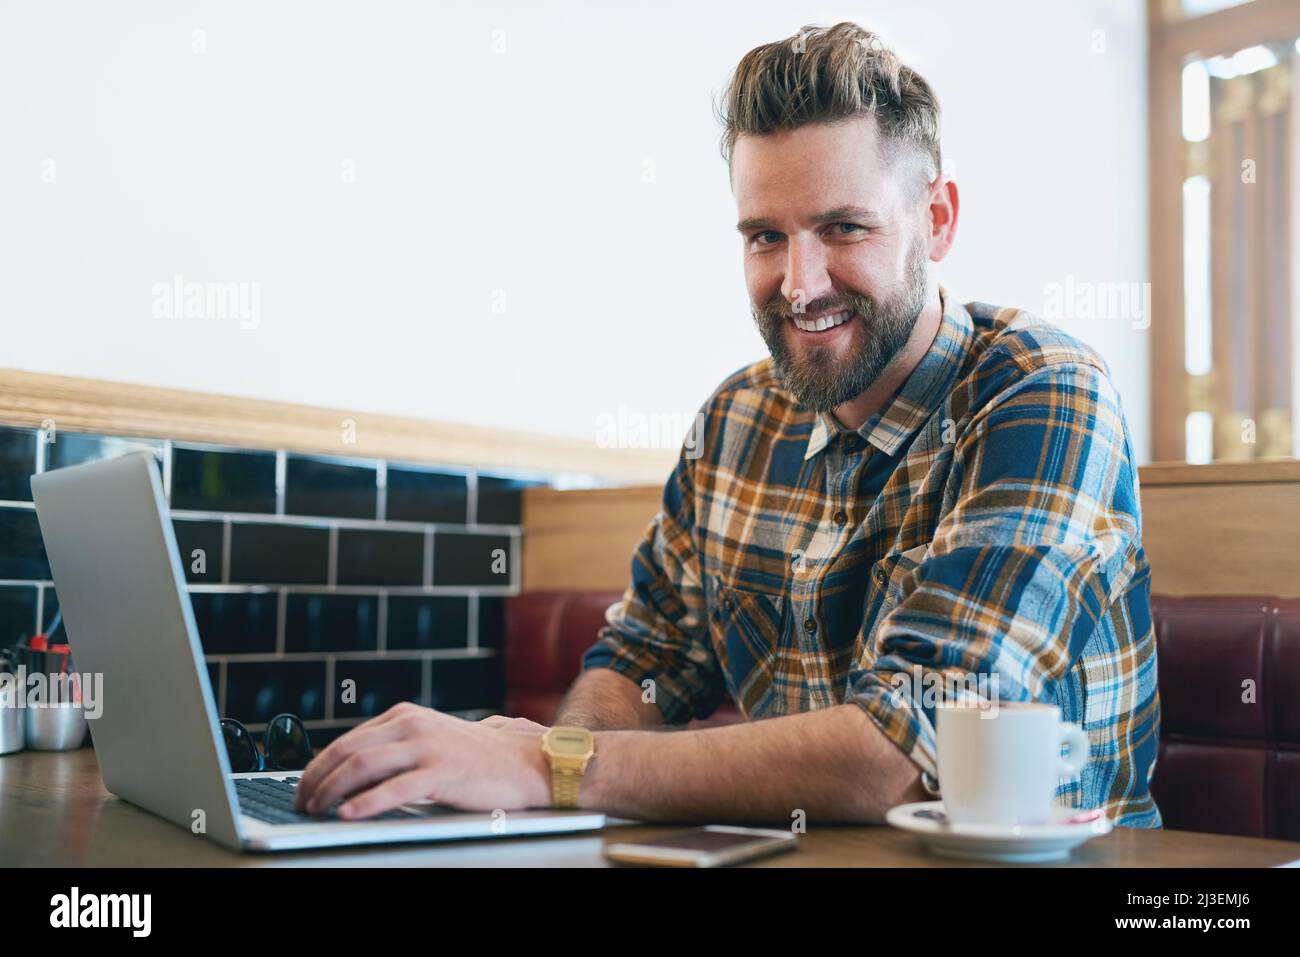 No coffee, no workee. Portrait of a young man using his laptop while sitting in a cafe. Stock Photo